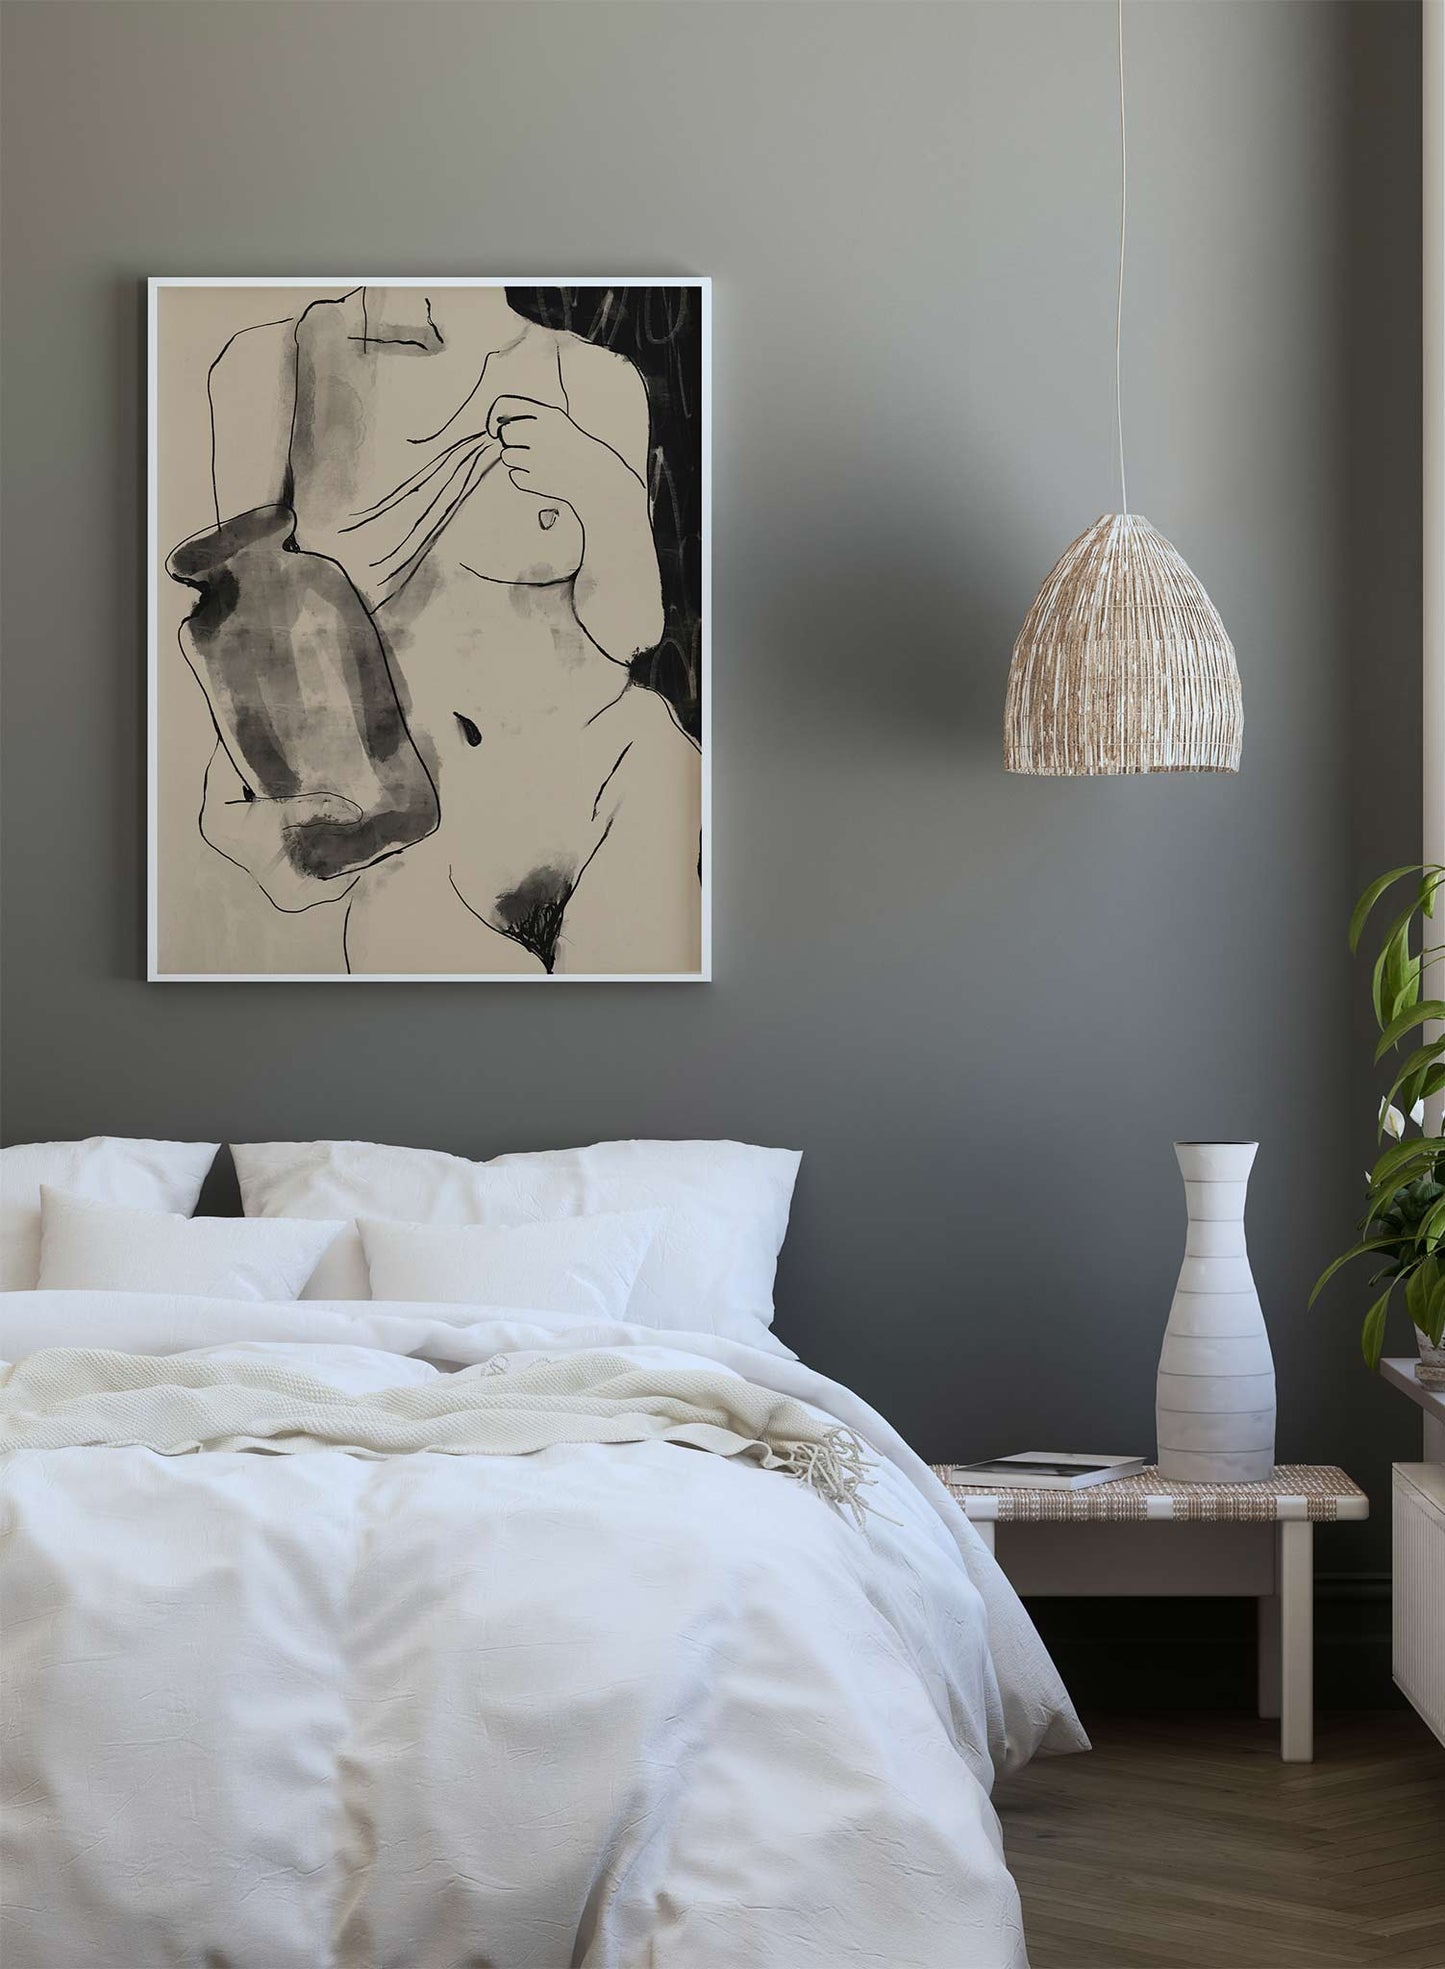 Fearless is a monochrome illustration of an almost naked, sensual and tempting woman holding a vase by Audrey Rivet in collaboration with Opposite Wall.